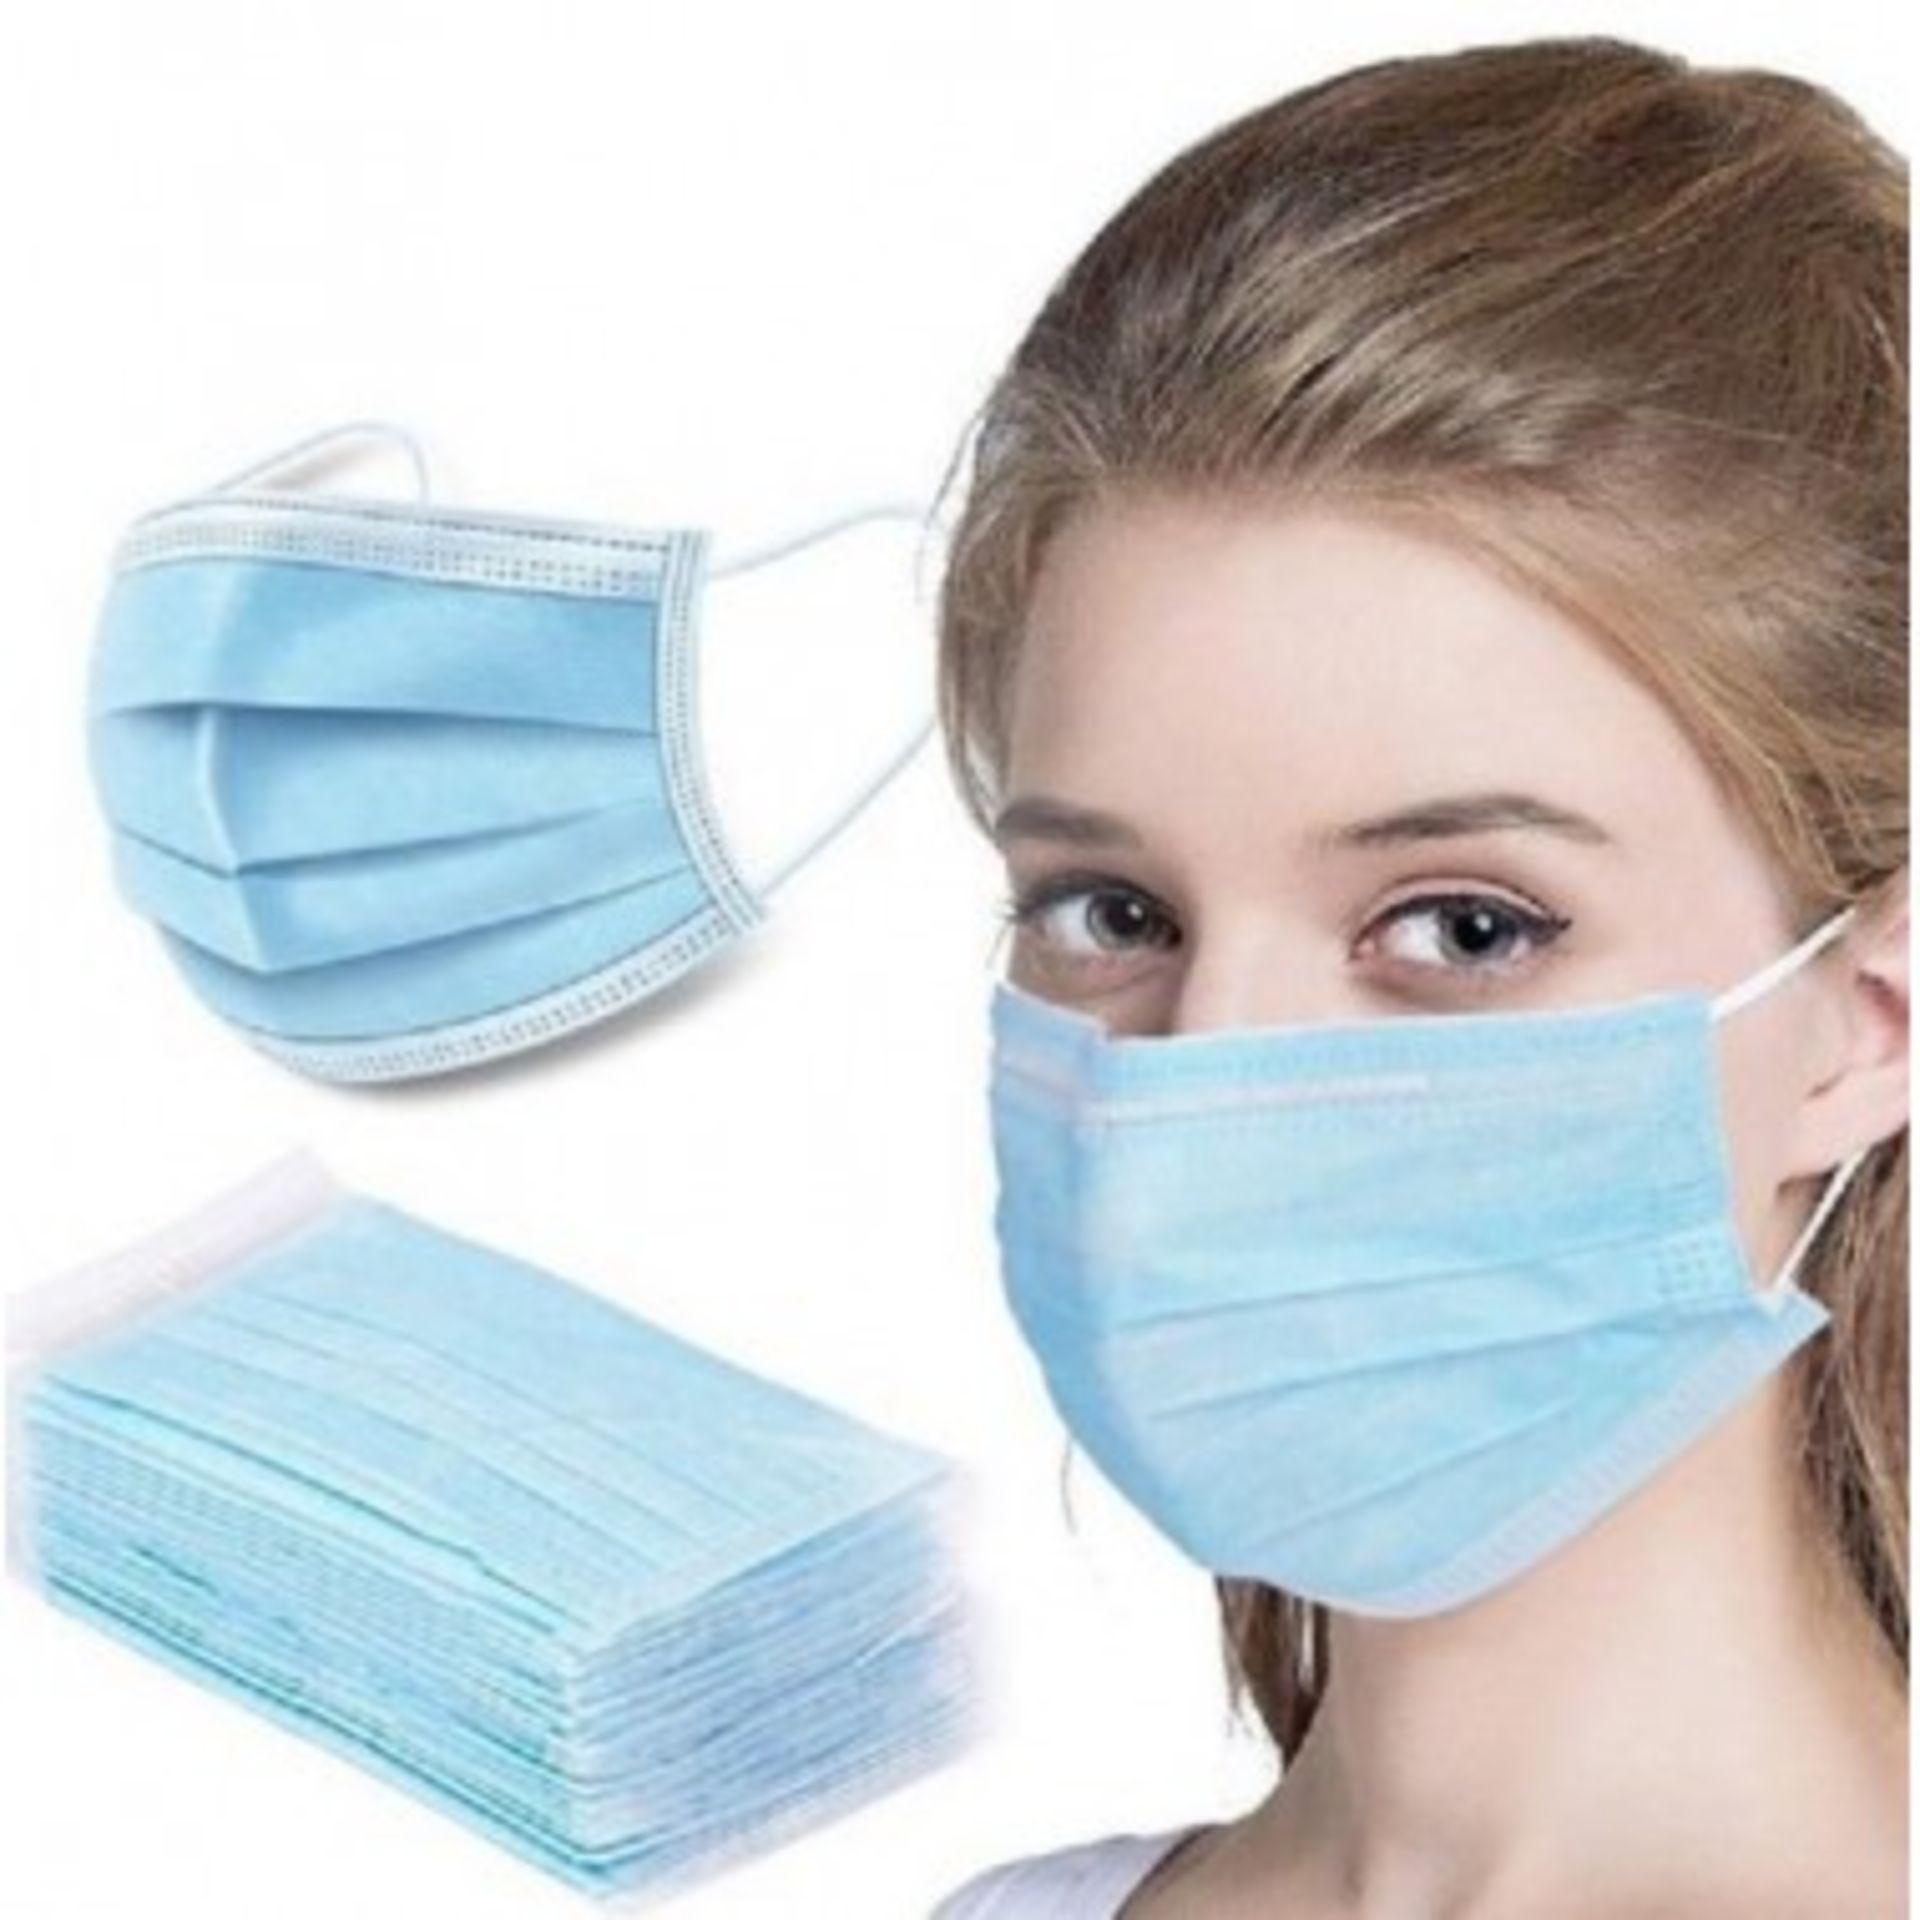 2,000 x Disposable Protective Face Masks - Brand New Boxed Stock - Three Layers of Protection With